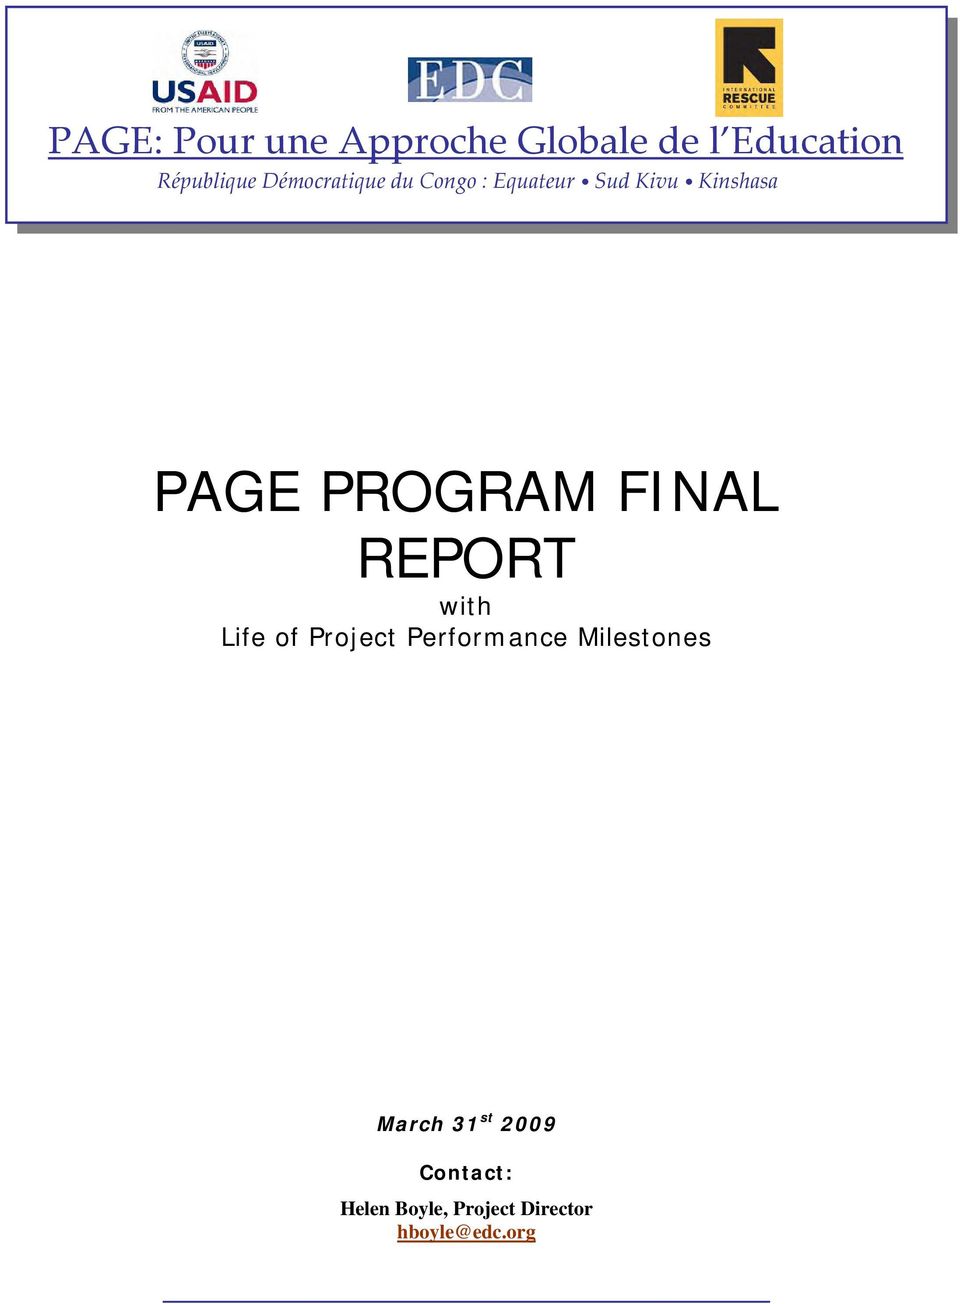 PROGRAM FINAL REPORT with Life of Project Performance